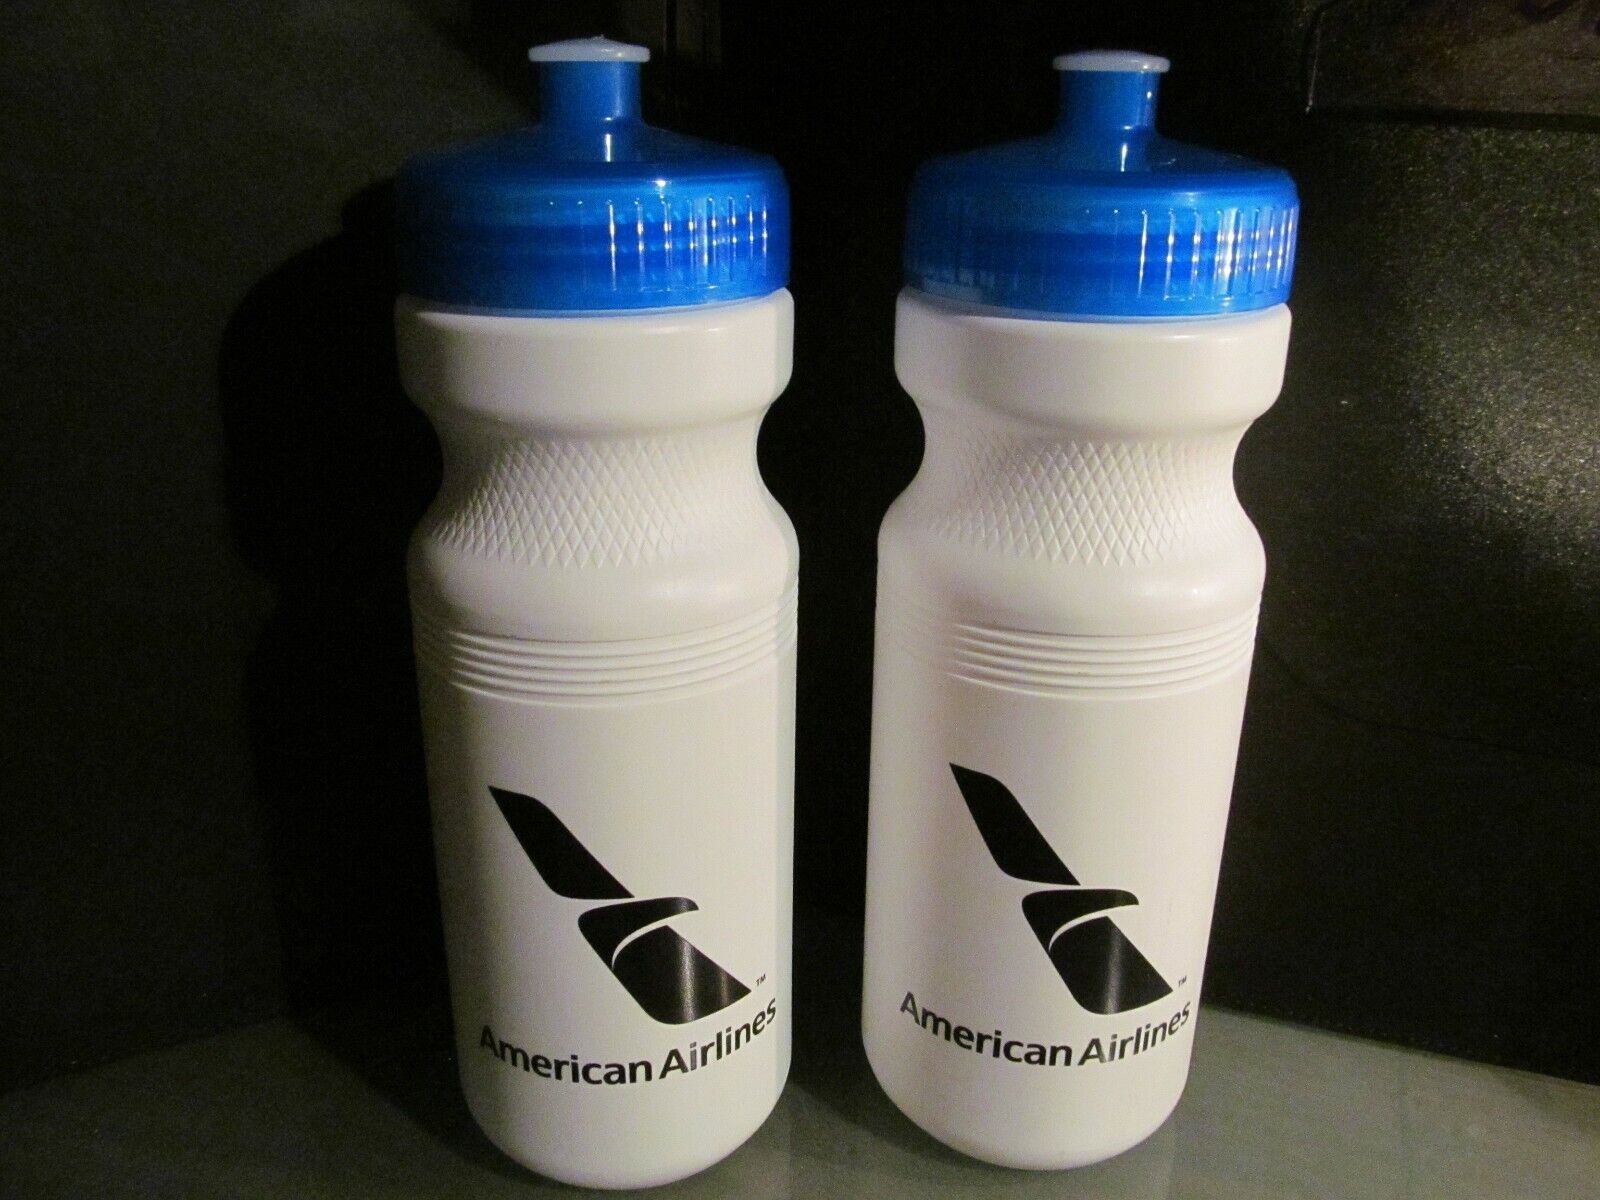 2 x AMERICAN AIRLINES white sport water bottle bike gym travel holder cup glass